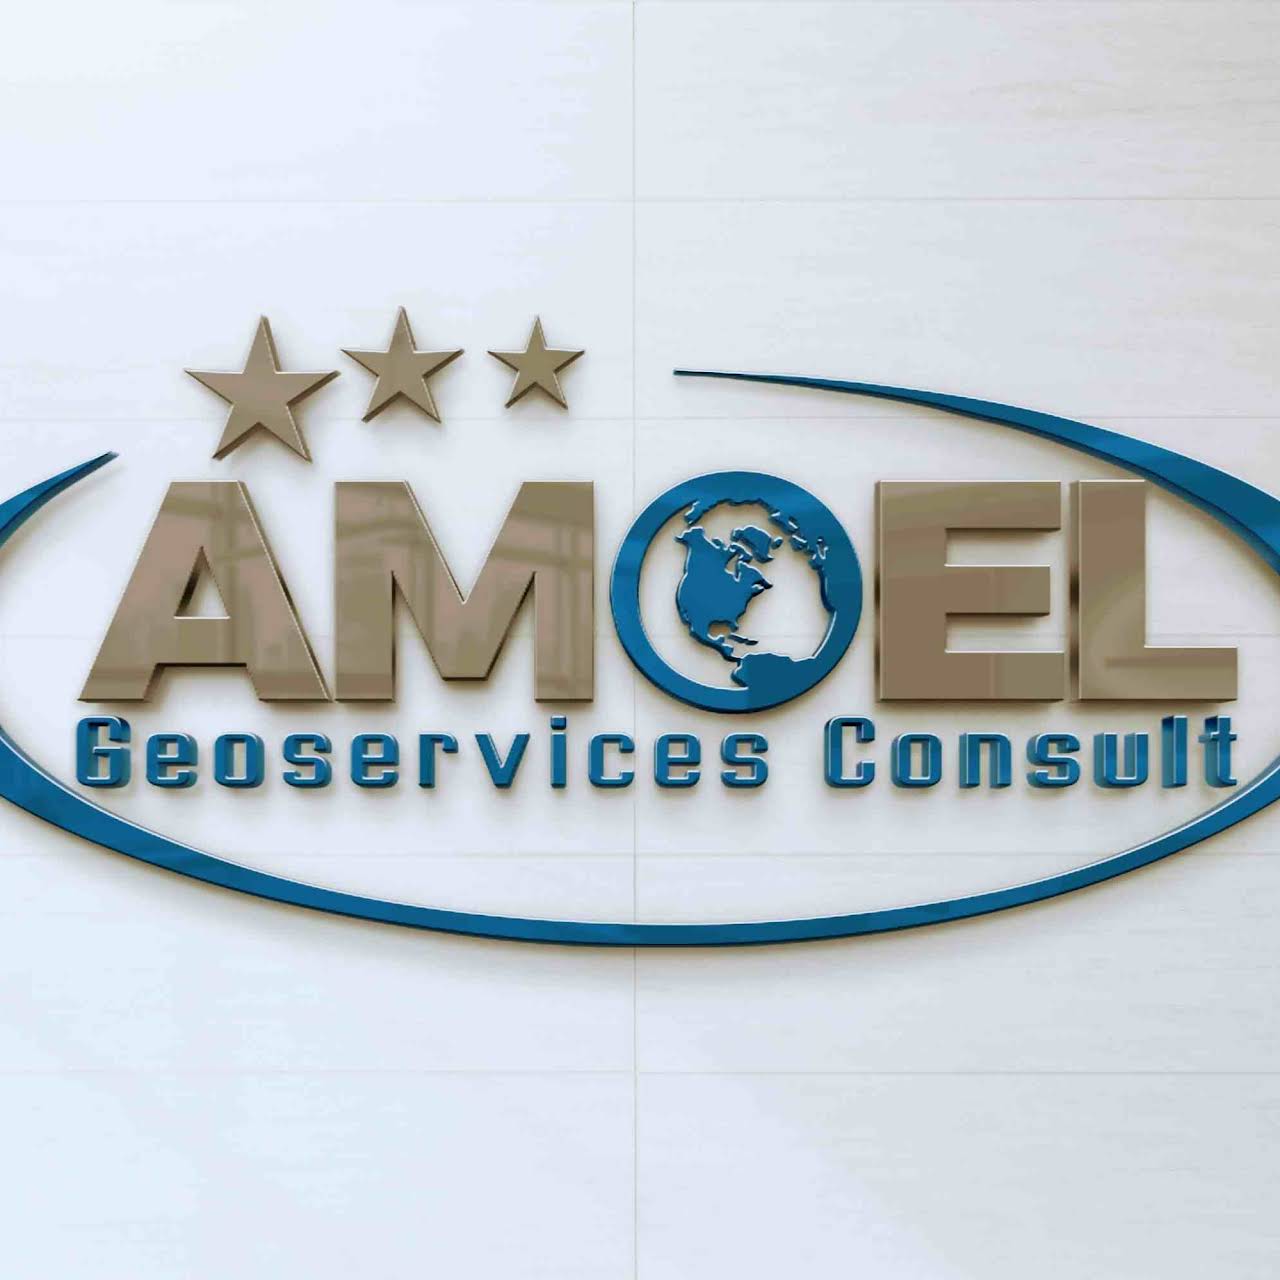 Amoel Geoservices Consult: Providing Clean Water Solutions for Sustainable Development